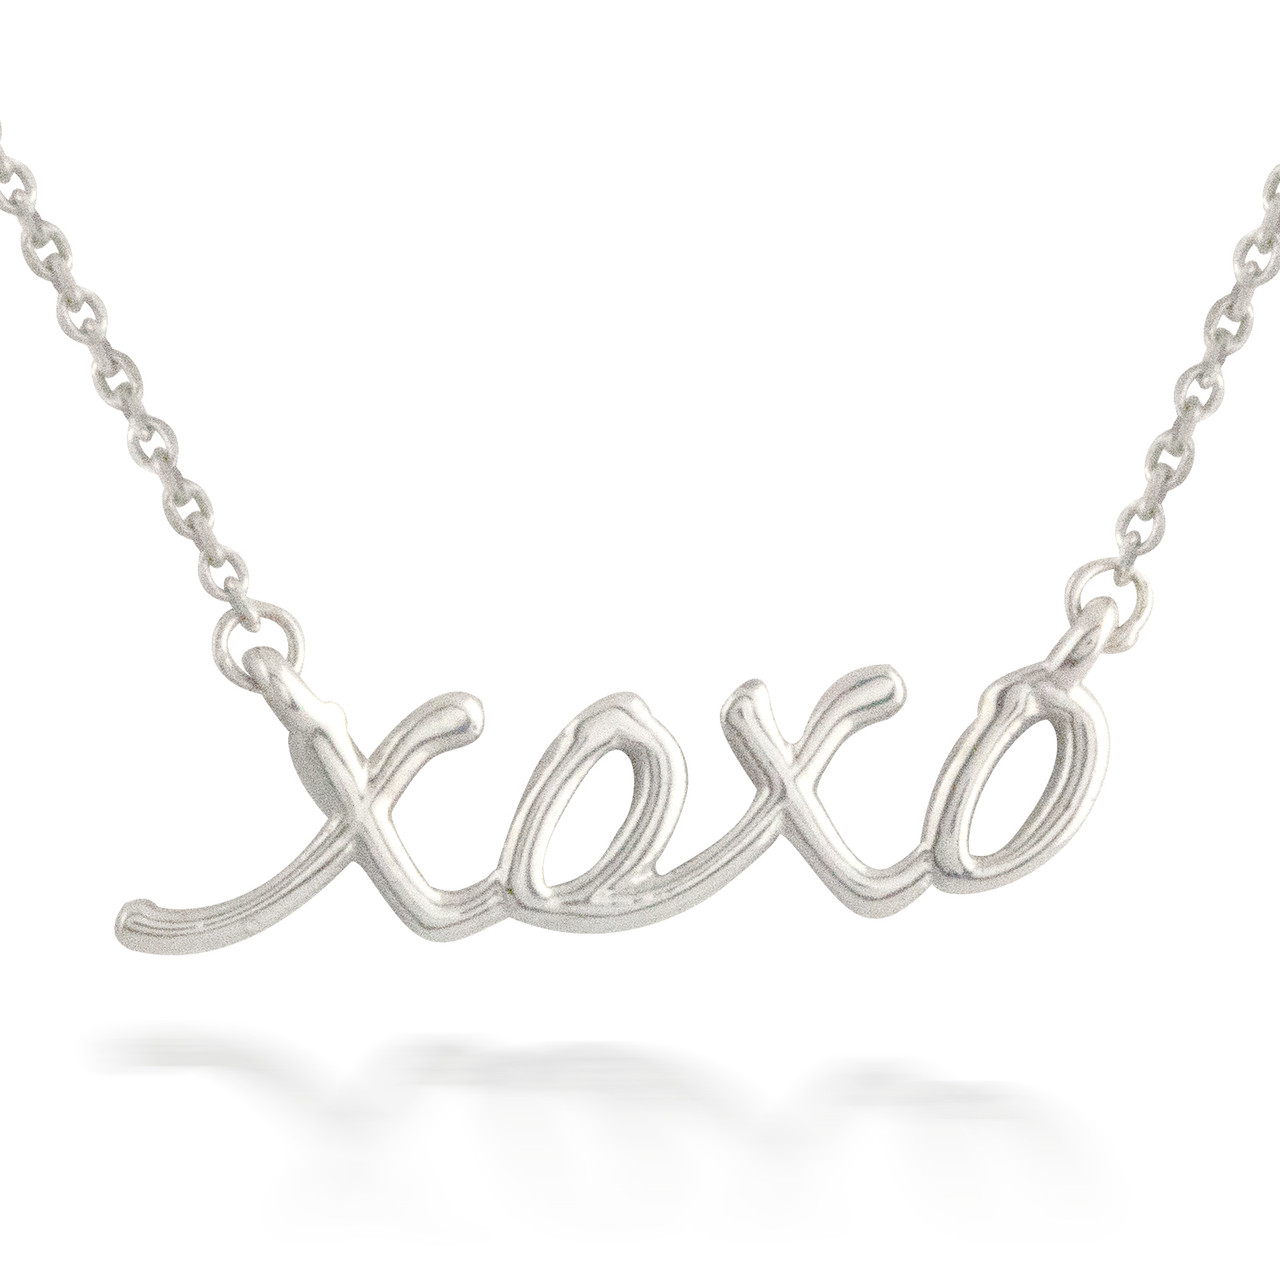 XO Necklace in Sterling Silver Gold Filled, Hugs and Kisses Necklace, XO  Charm, XO Pendant, Modern Jewelry, Everyday Necklace, Xoxo - Etsy